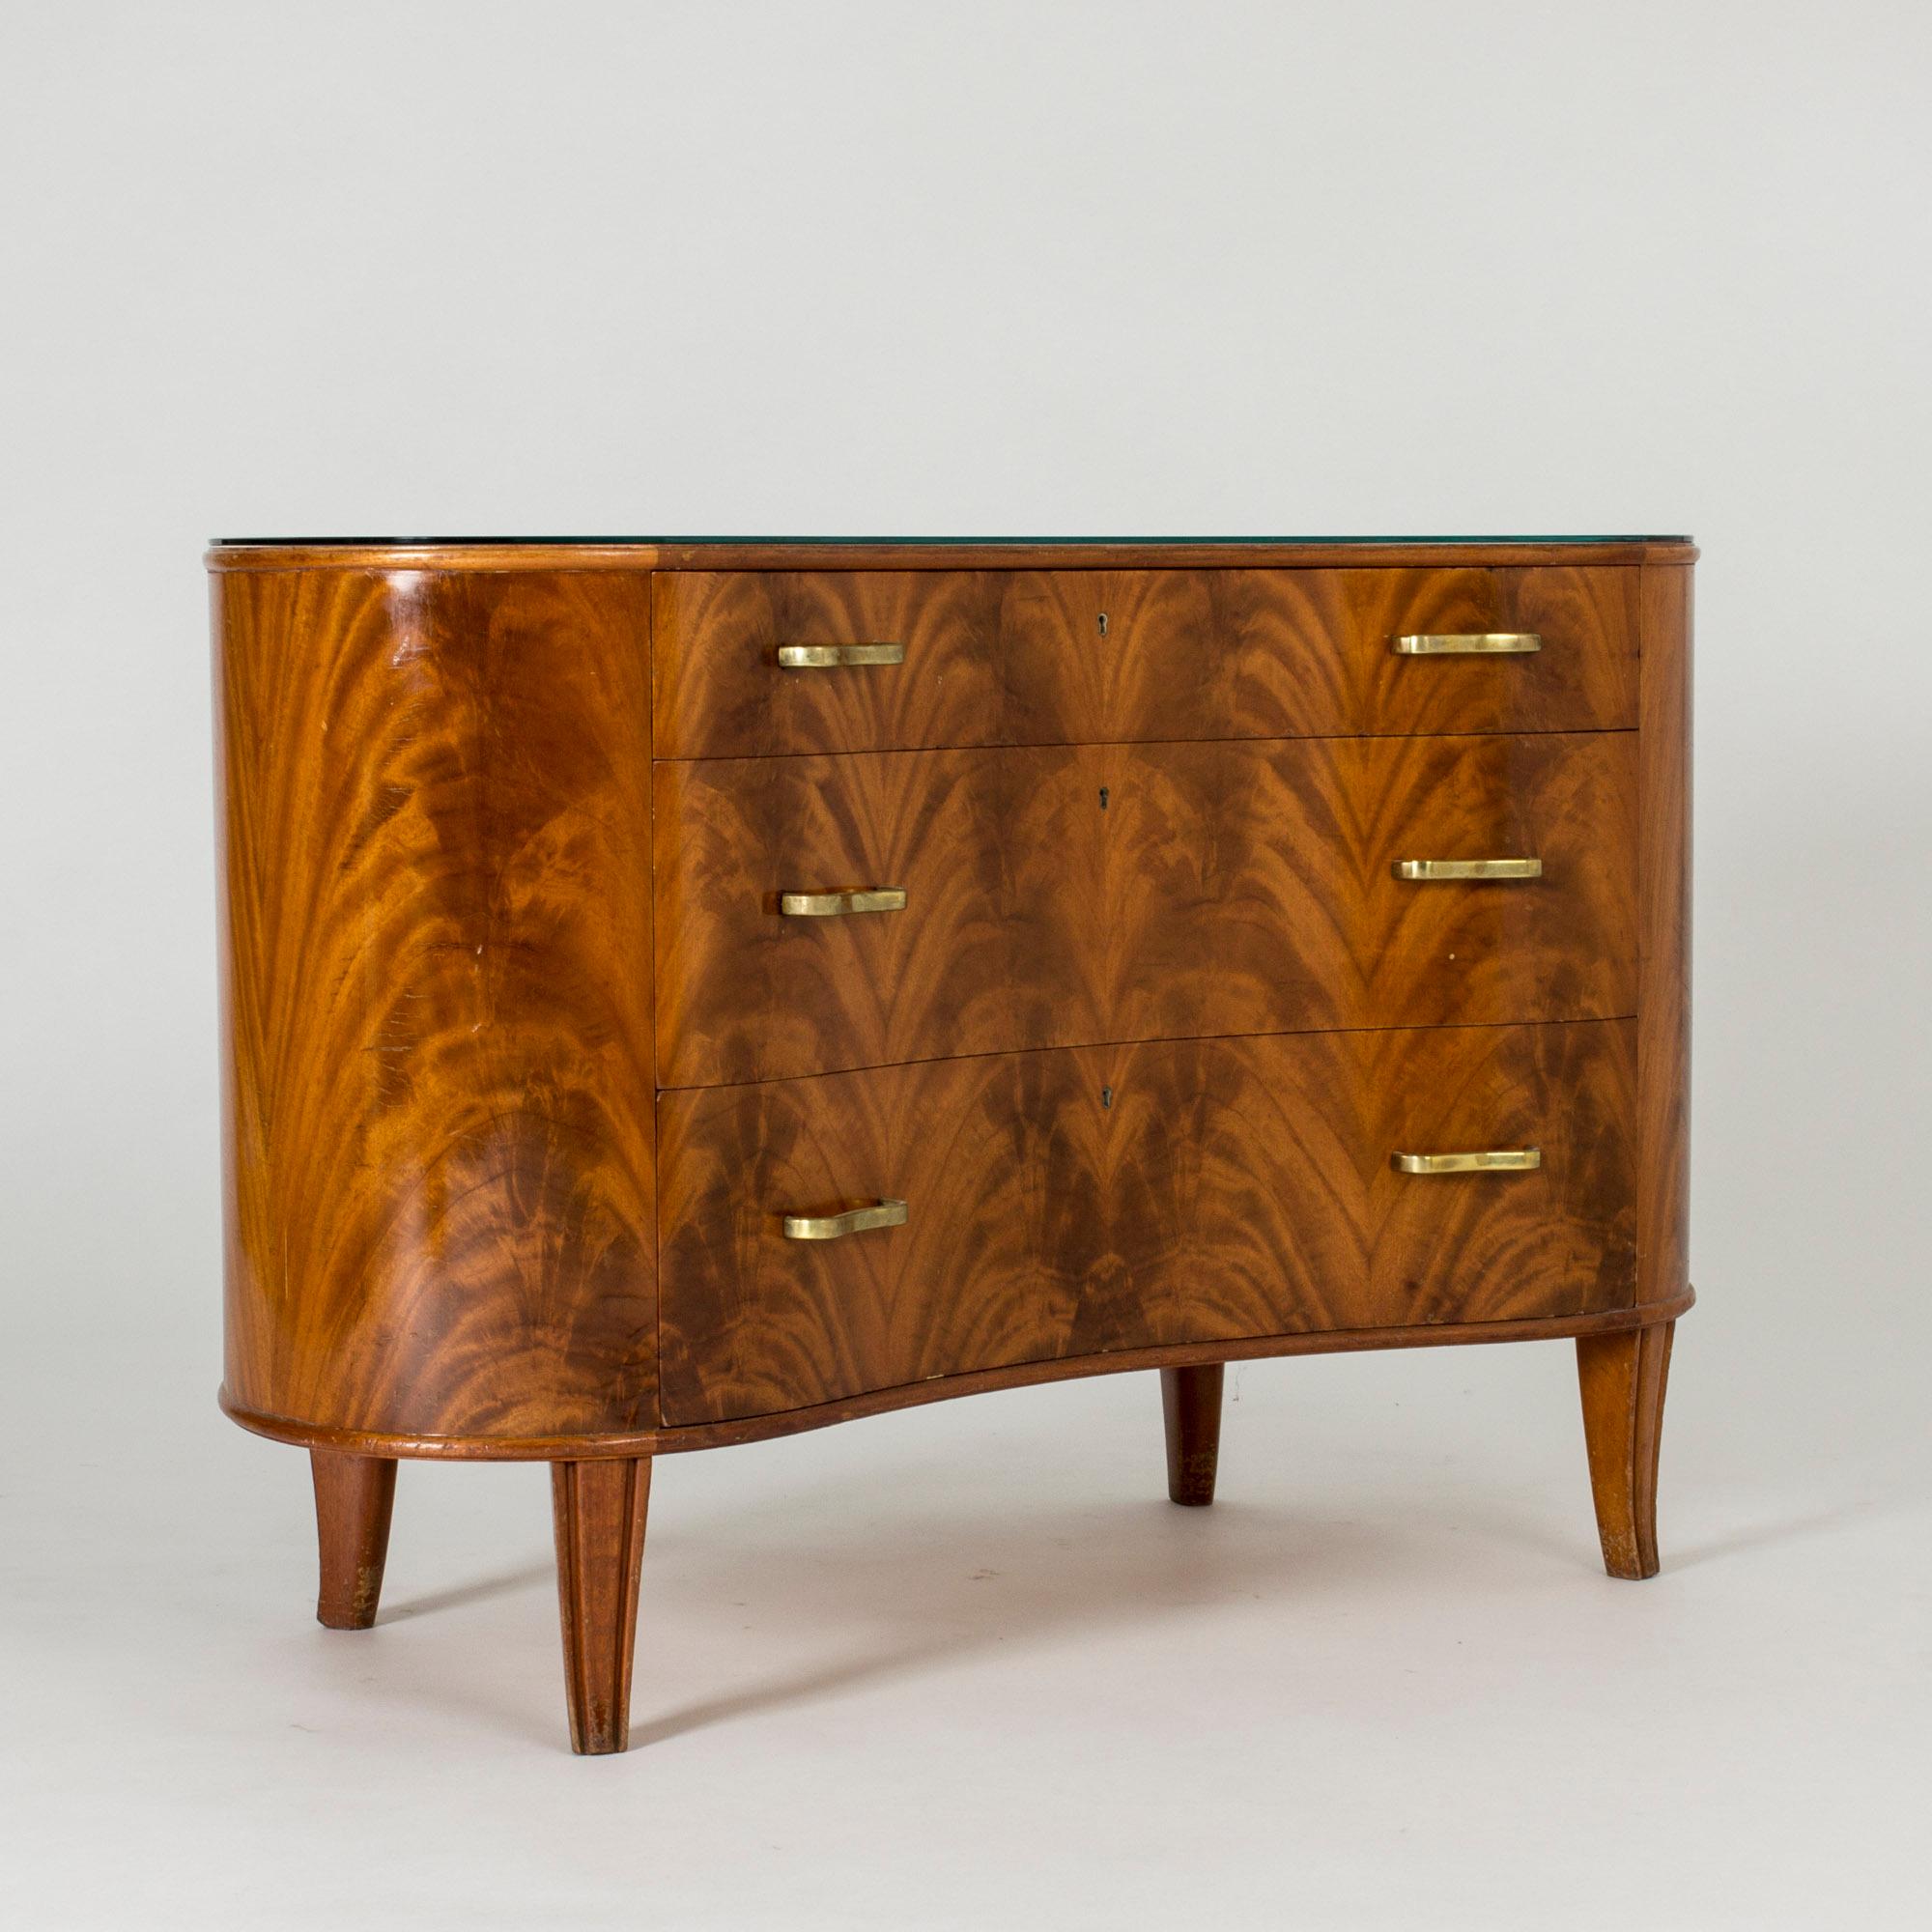 Beautiful, kidney-shaped mahogany chest of drawers from Bodafors, with elegant curved brass handles and green-tinted glass on the top. The veneer has been arranged to create a dramatic effect which contrasts nicely with the gentle design. Great